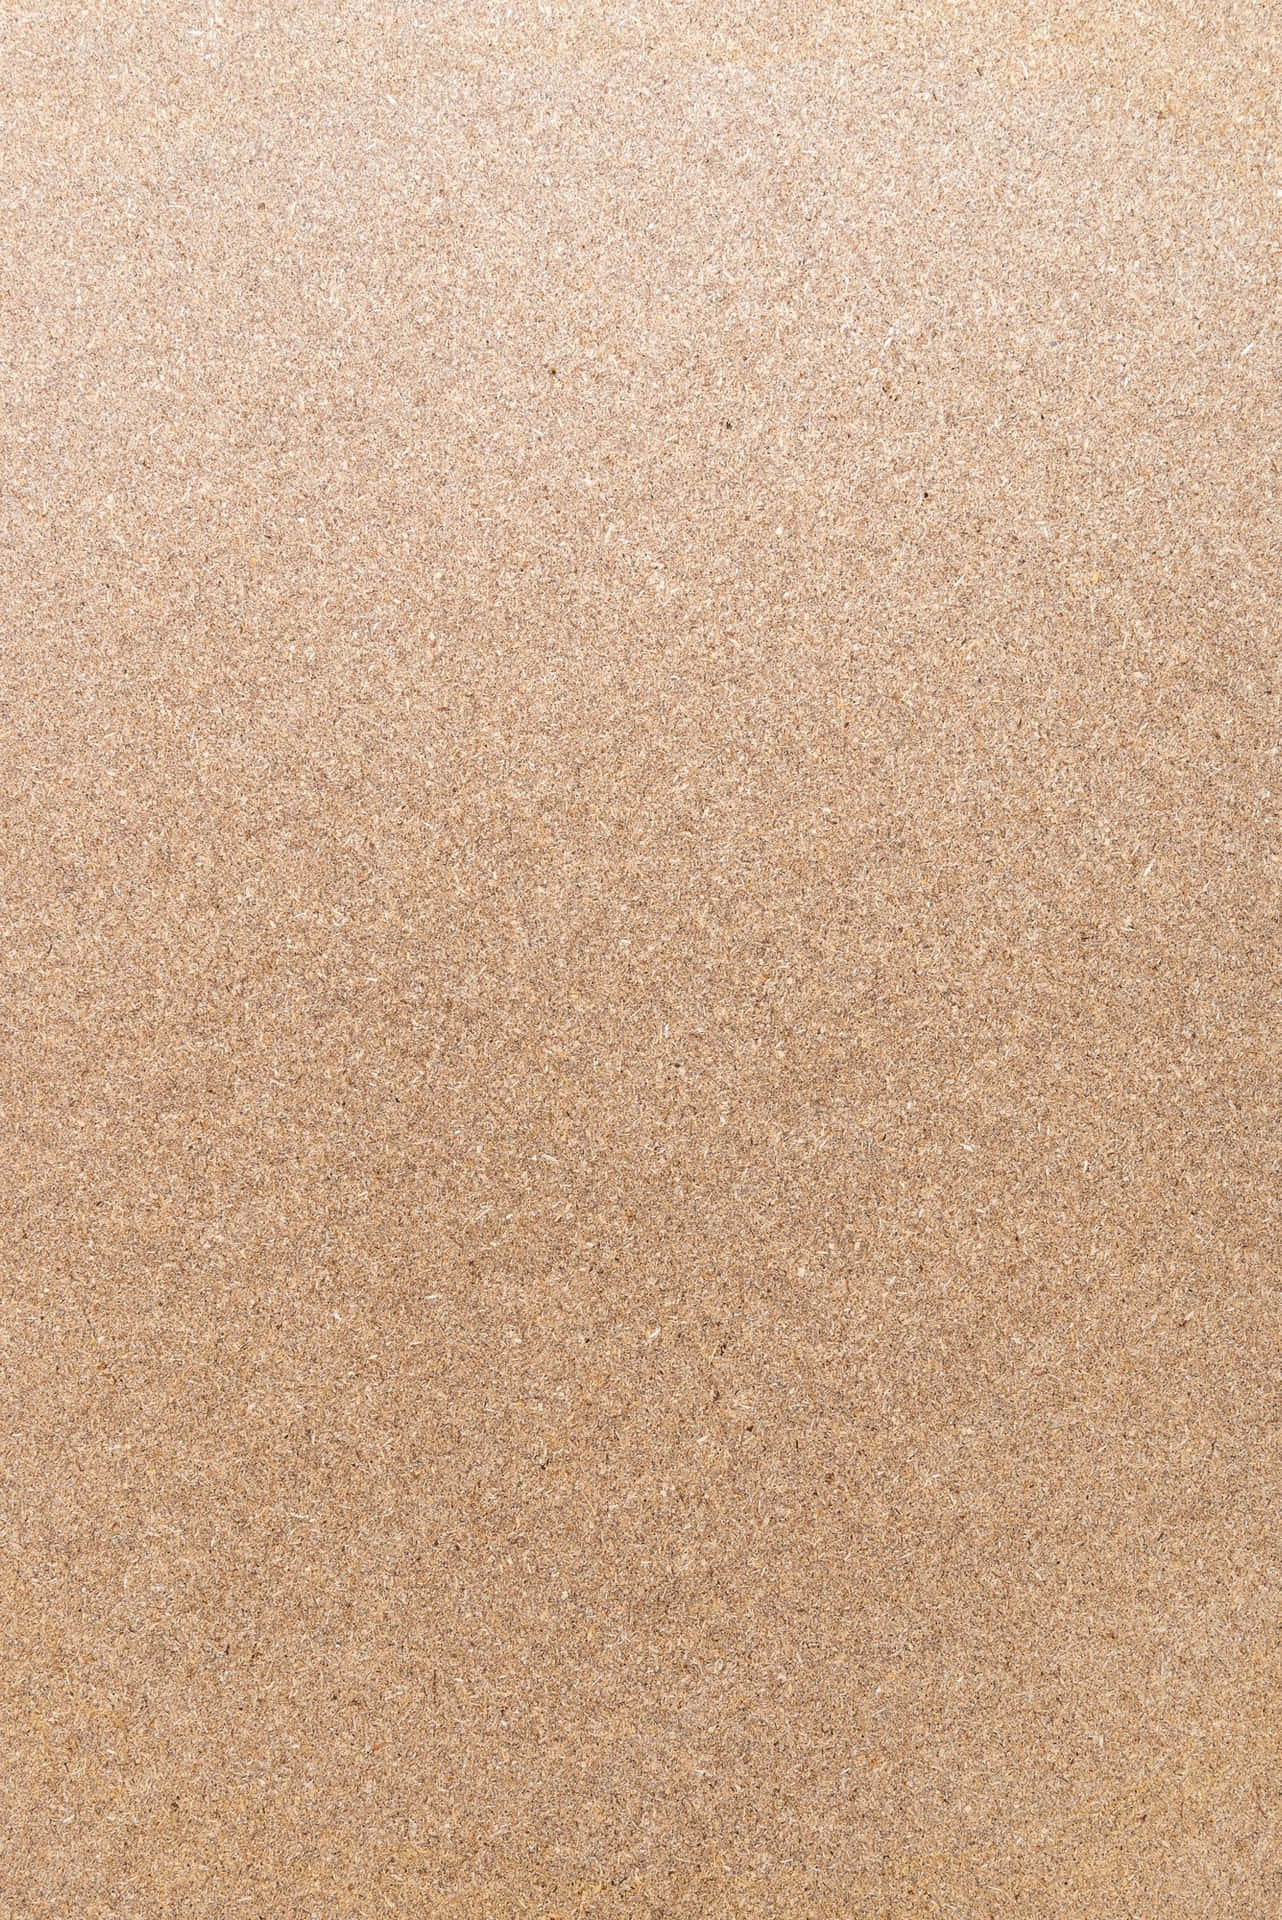 A Brown Paper Background